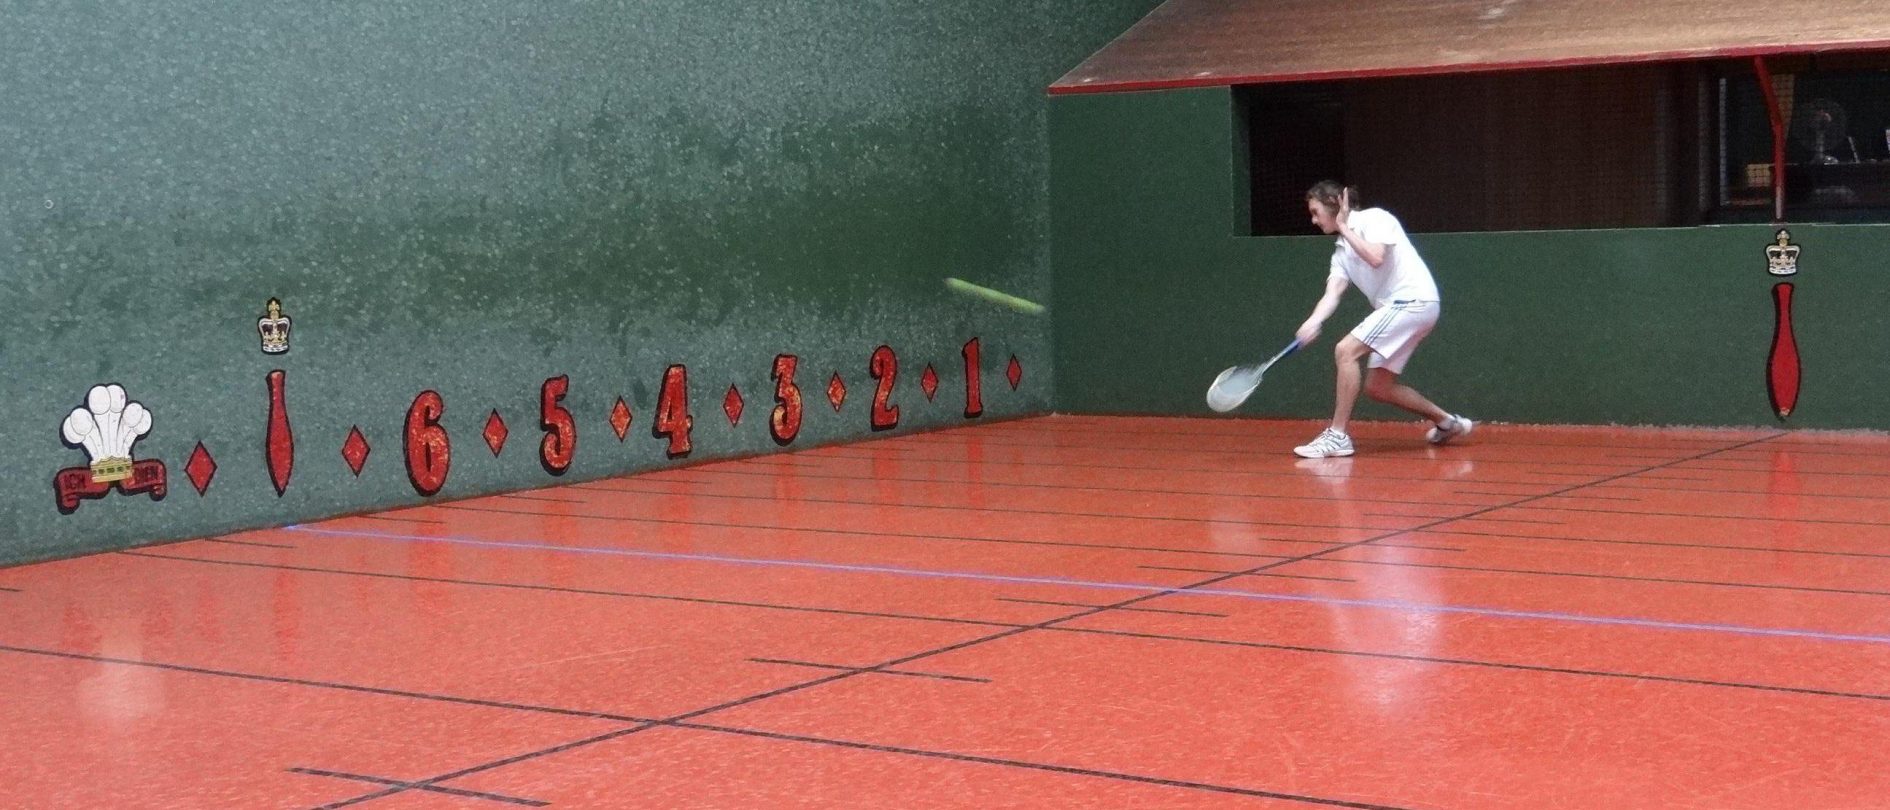 2 3 Club Facilities Real Tennis Courts